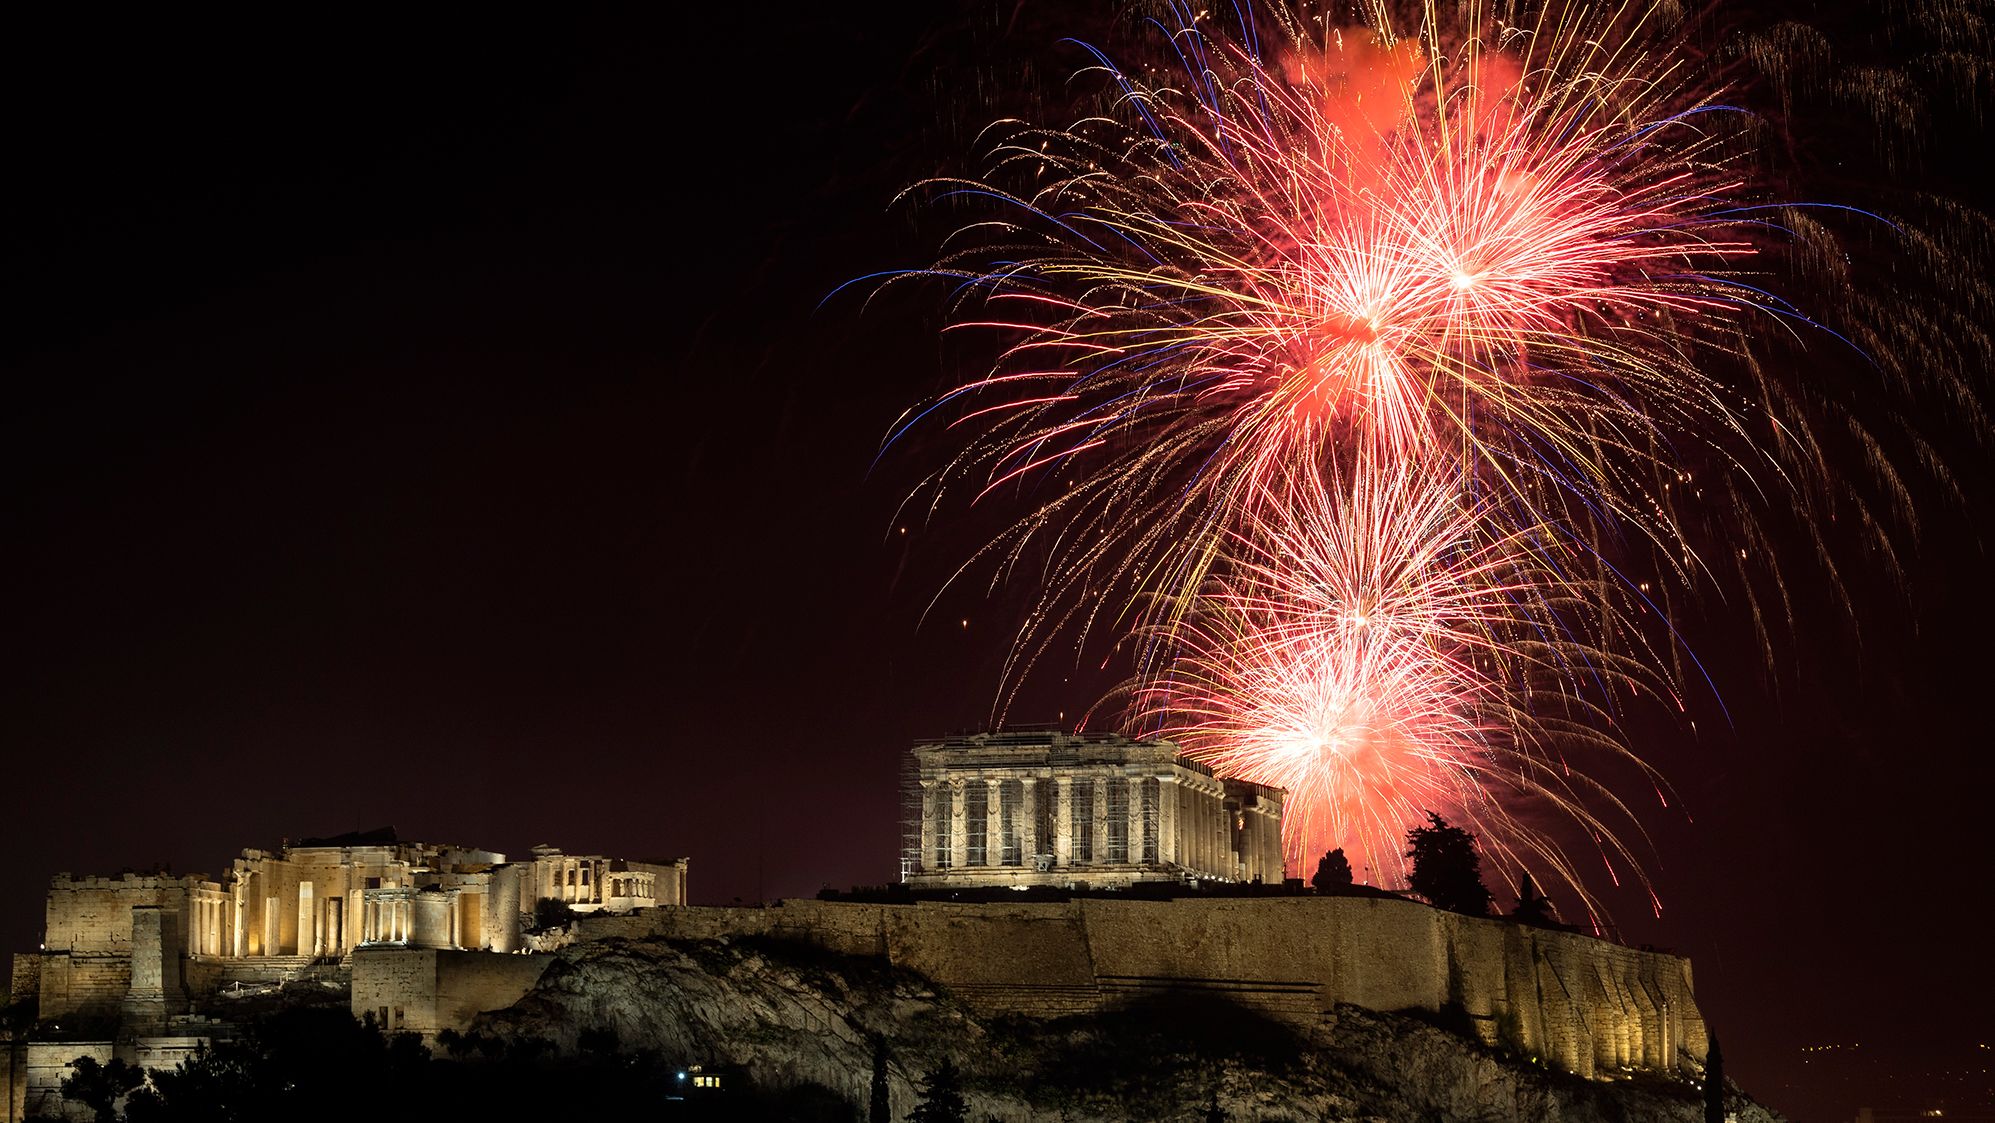 Fireworks explode over the Parthenon in Athens, Greece.